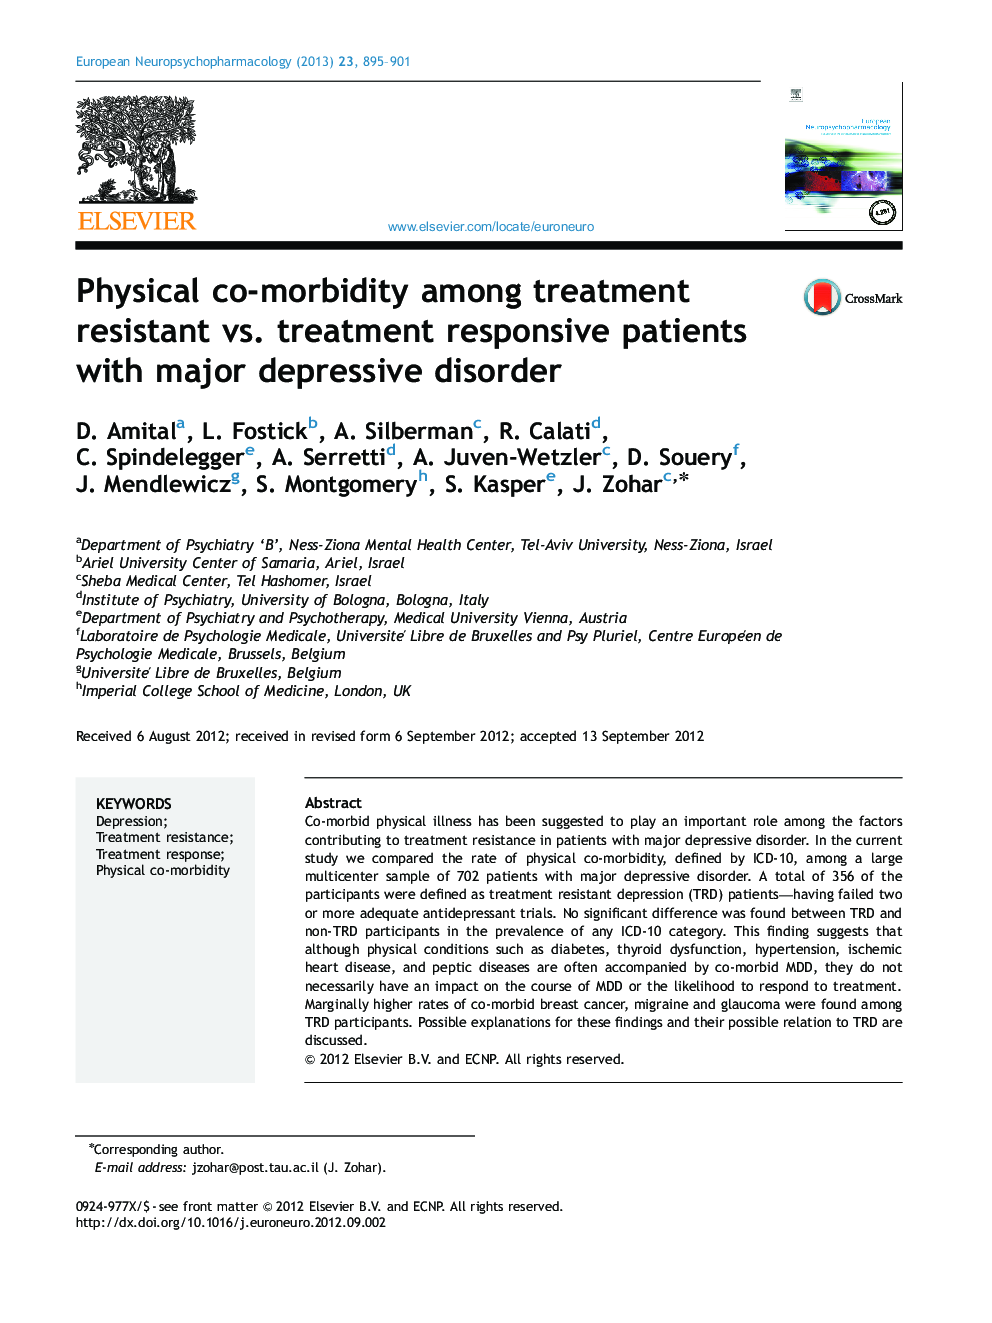 Physical co-morbidity among treatment resistant vs. treatment responsive patients with major depressive disorder